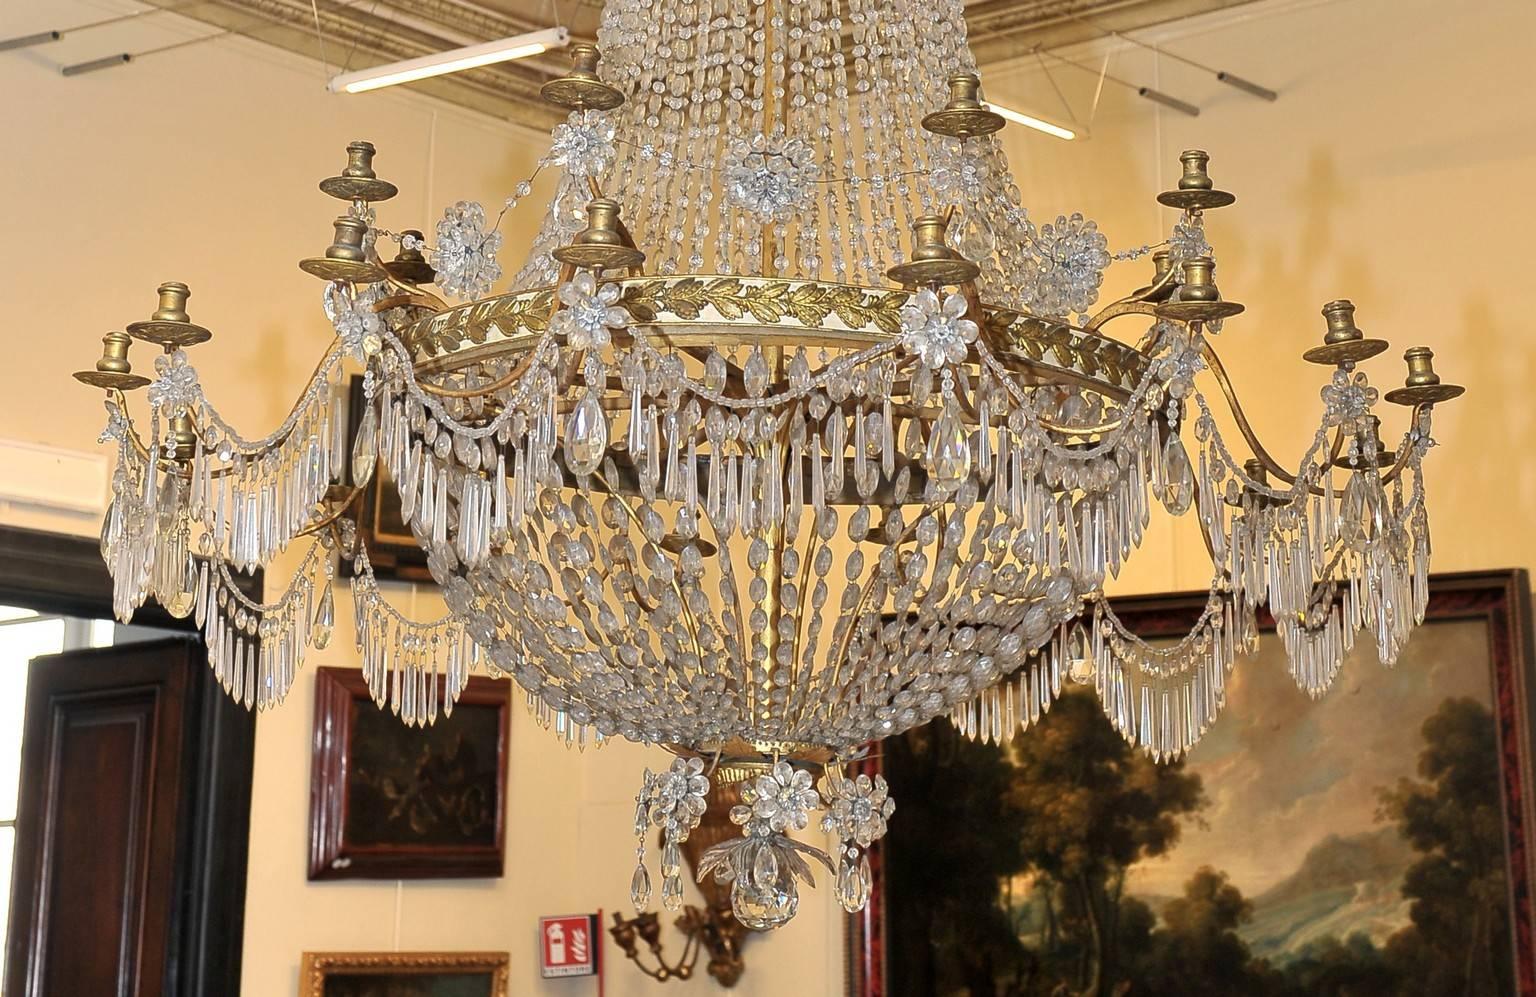 Louis XVI chandelier in gilded metal plate and cut crystal with 24 lights on two orders. Top-shaped balloon and decorated with golden palms - Genoa late 18th-early 19th century.